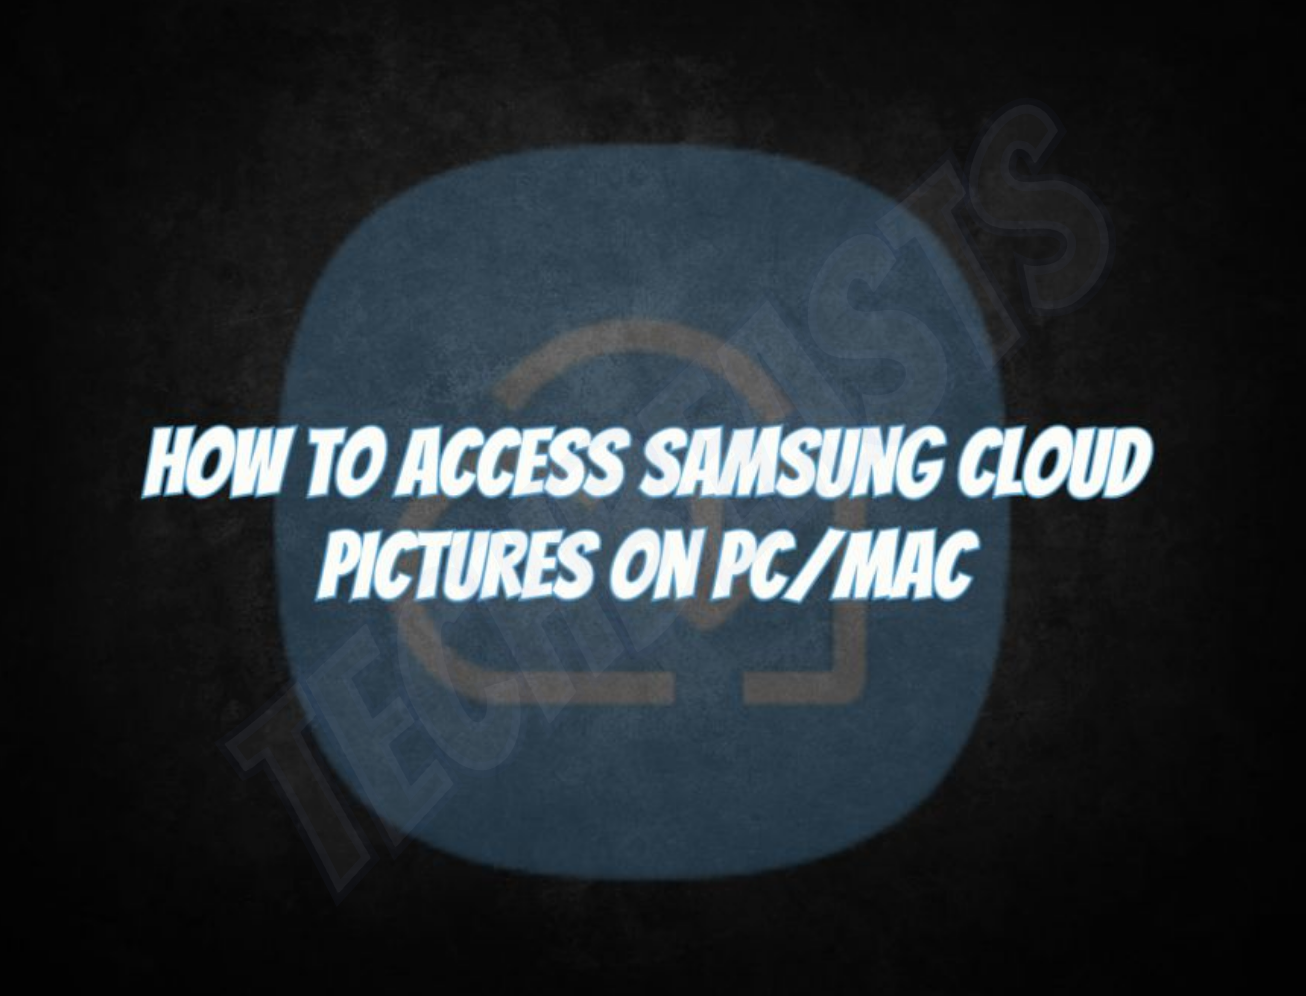 Access Samsung Cloud Pictures on PC